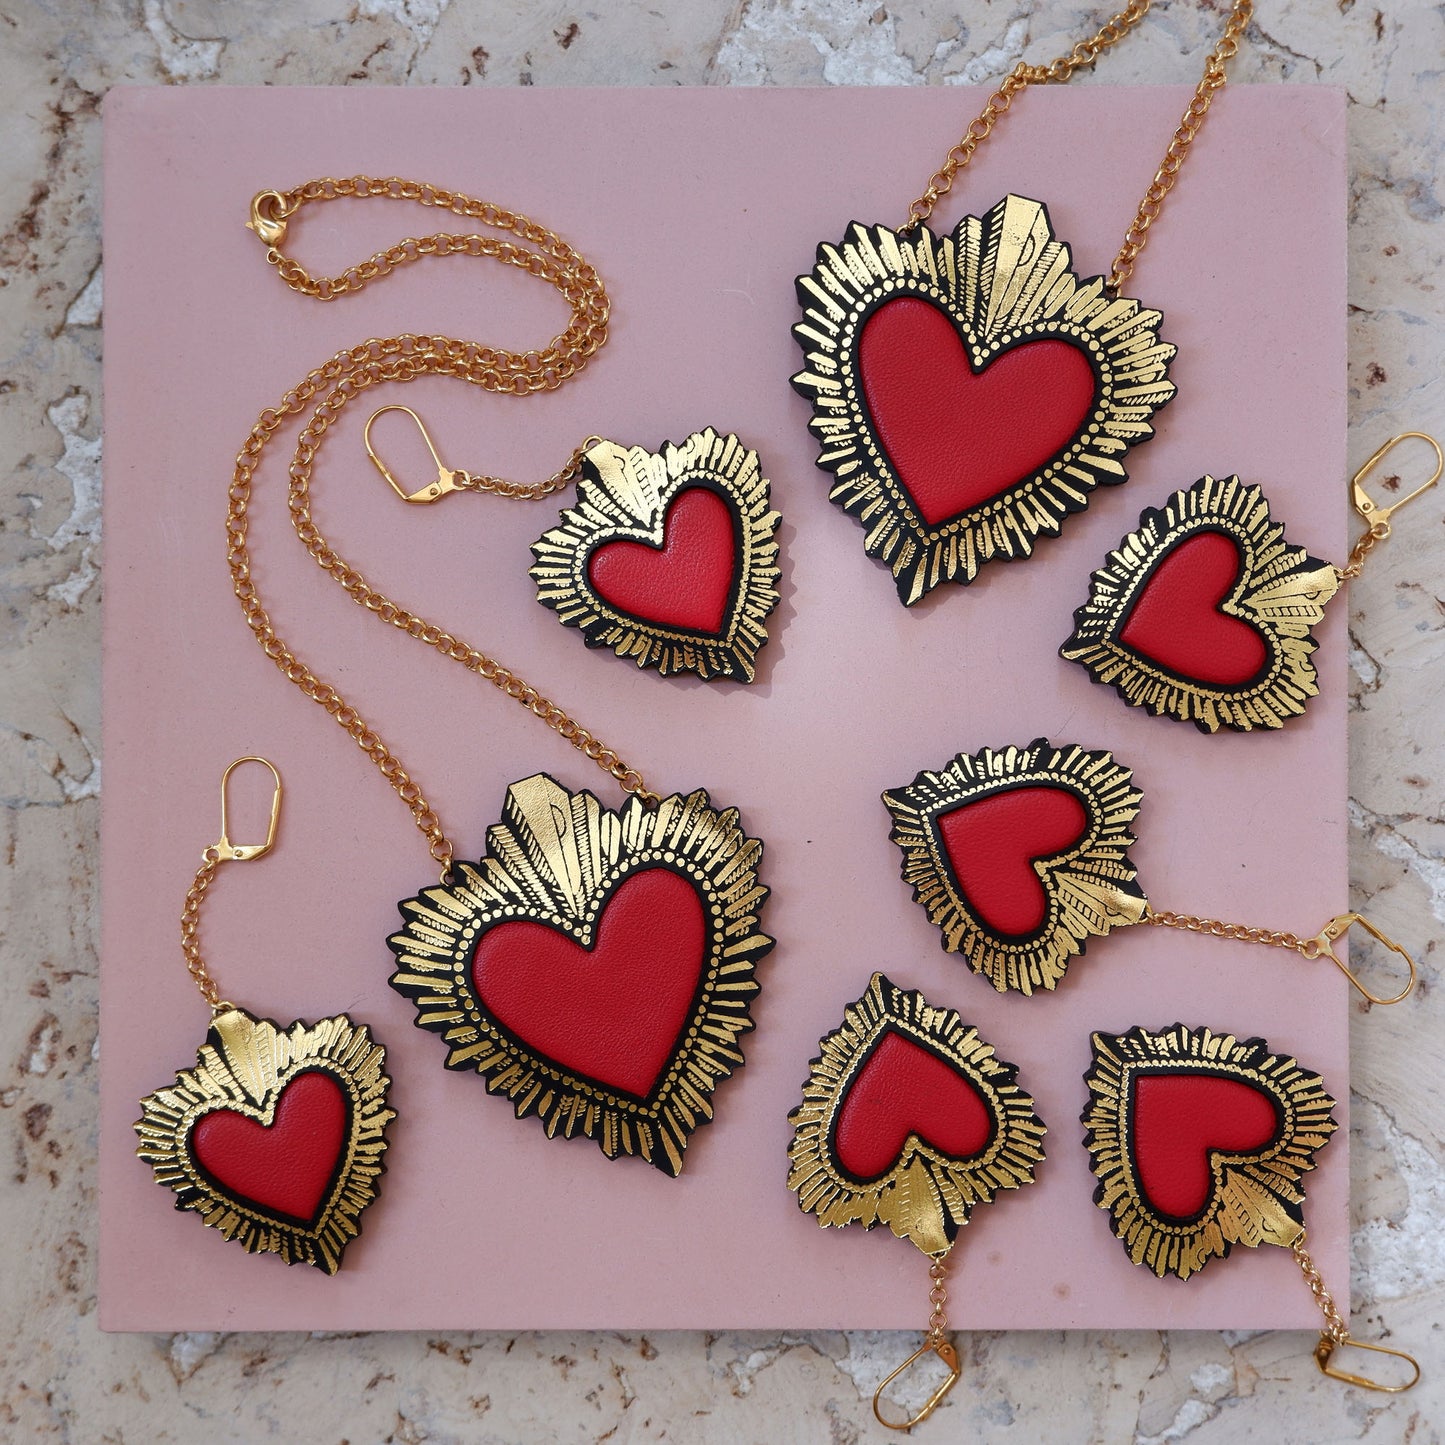 display of  red leather sacred heart pendant necklaces, on gold belcher chain with matching red leather sacred heart earrings, on pink background